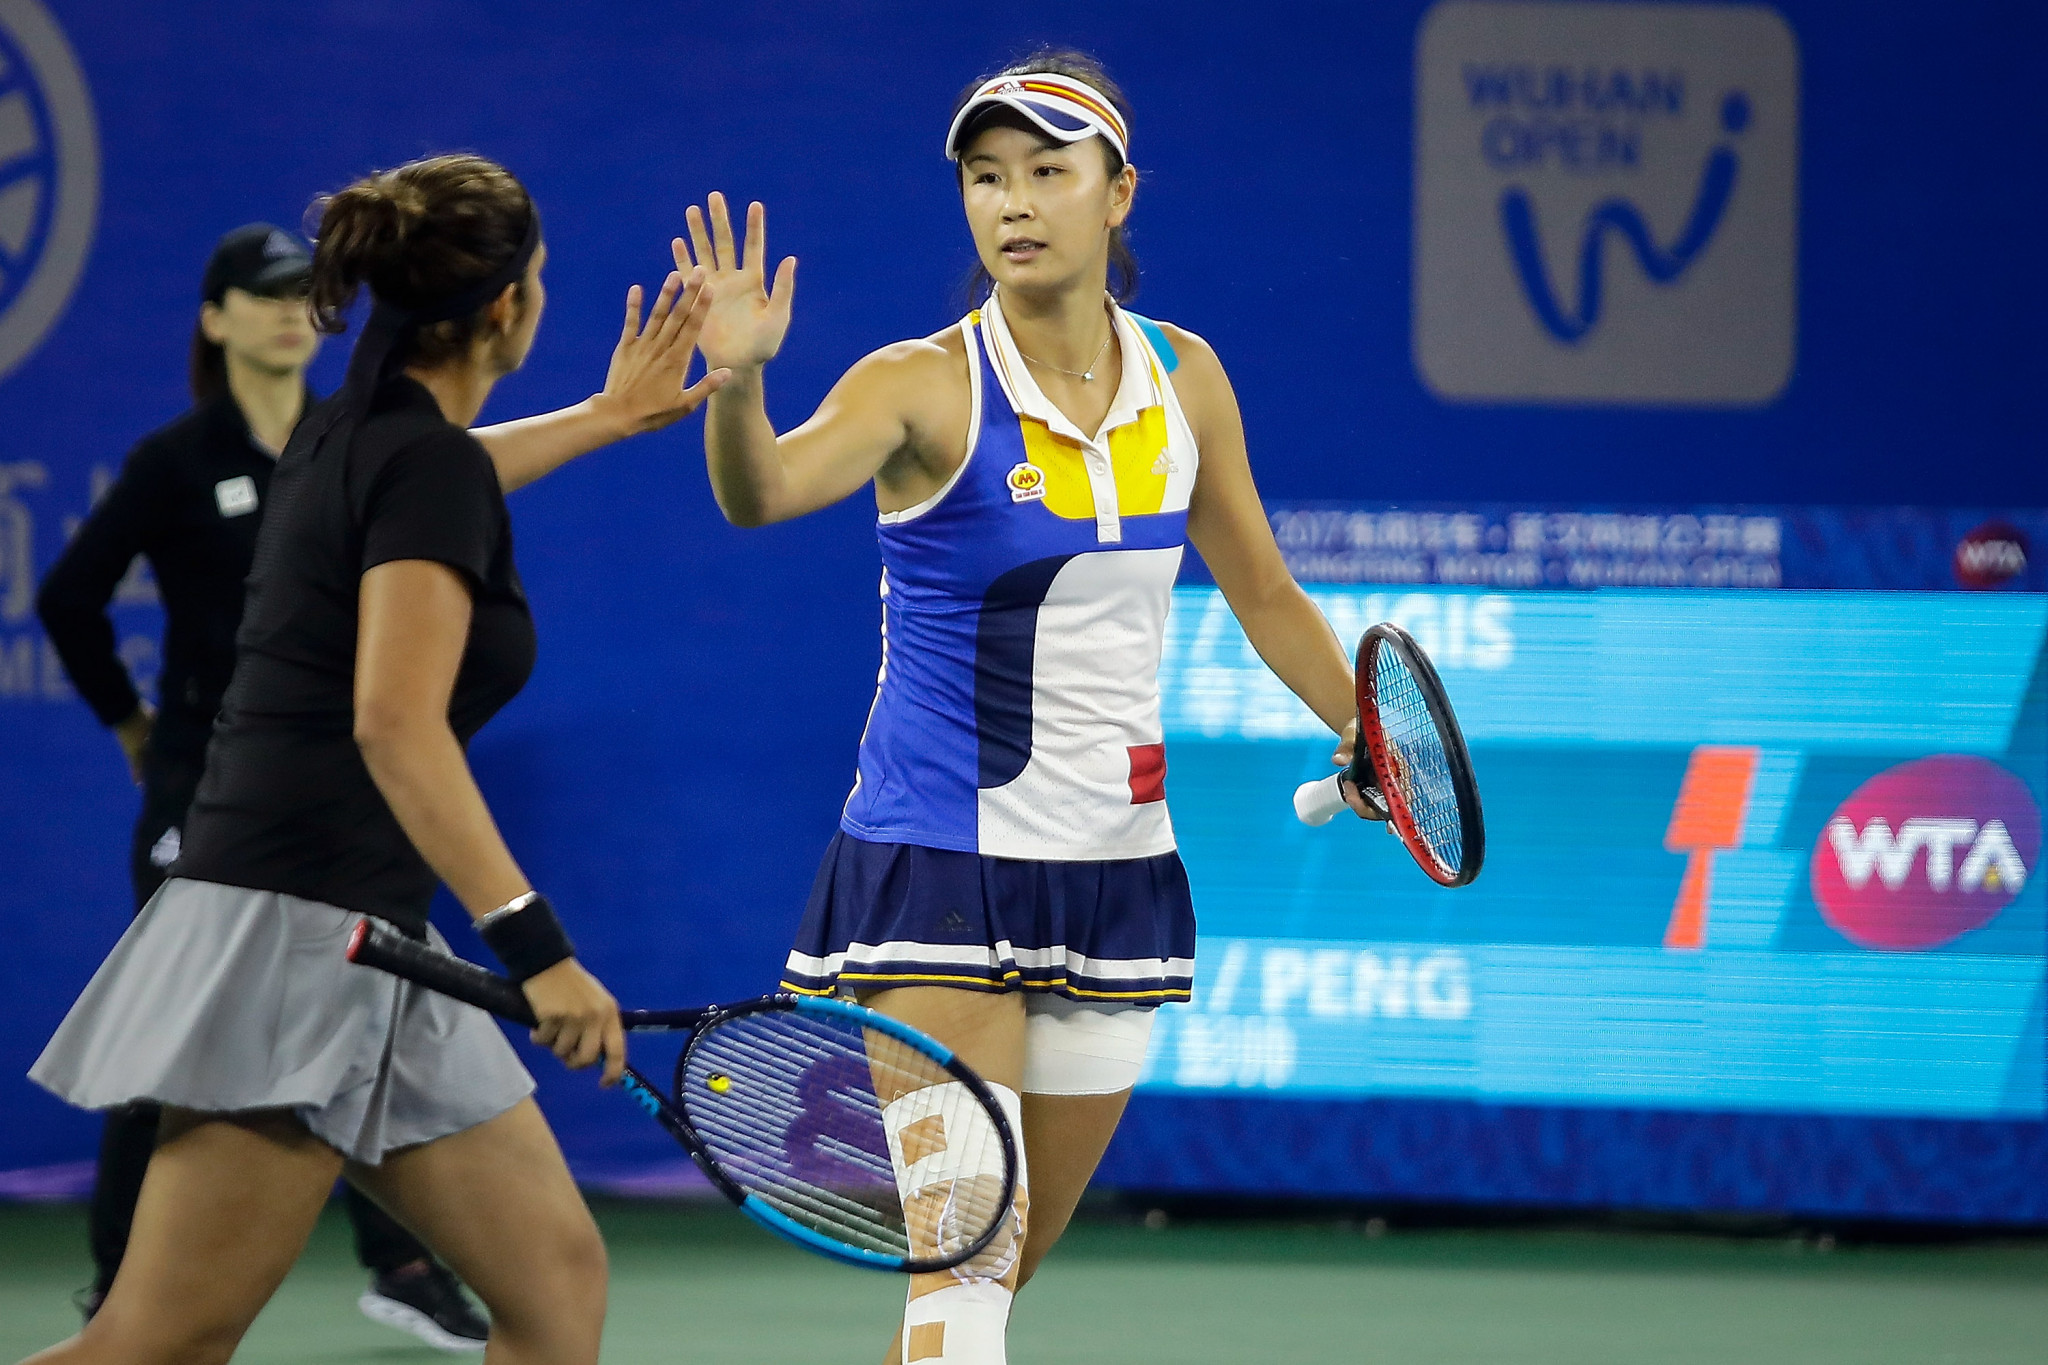 Peng Shuai, right, who is a three-time Olympian and former Wimbledon women's doubles champion, accused Zhang Gaoli of sexual assault ©Getty Images